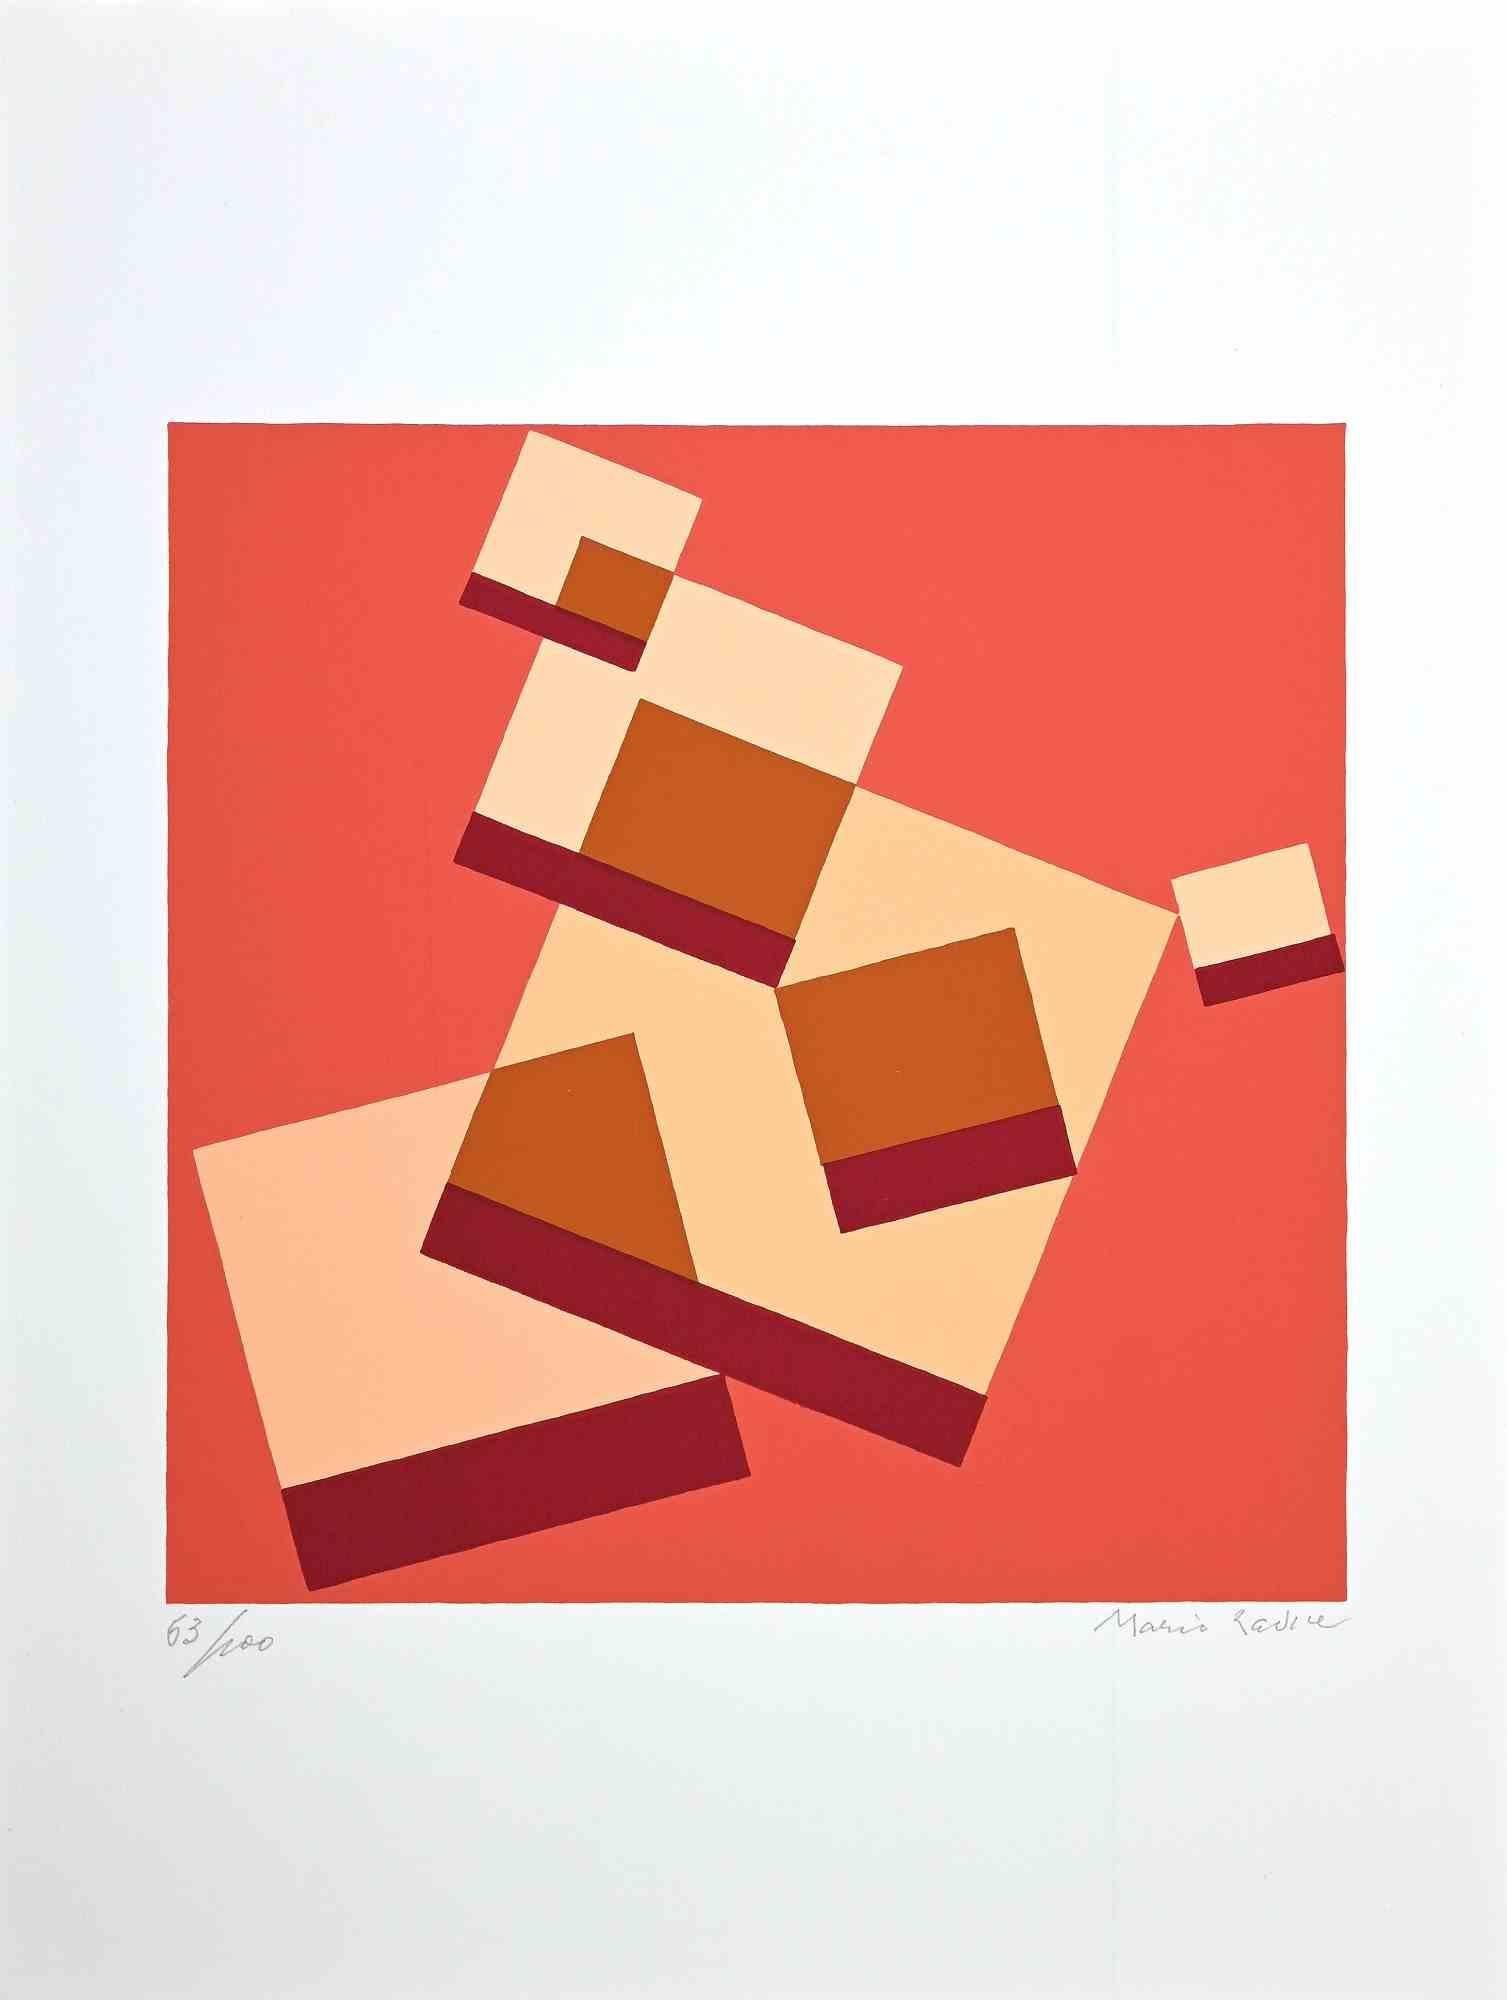 Lesbo is a beautiful original colored screen print on paper, realized by the Italian artist and pioneer of Abstract art  Mario Radice  (1898-1987), in 1964.

Hand-signed and numbered in pencil on the lower margin.

This is a perfect artwork for your